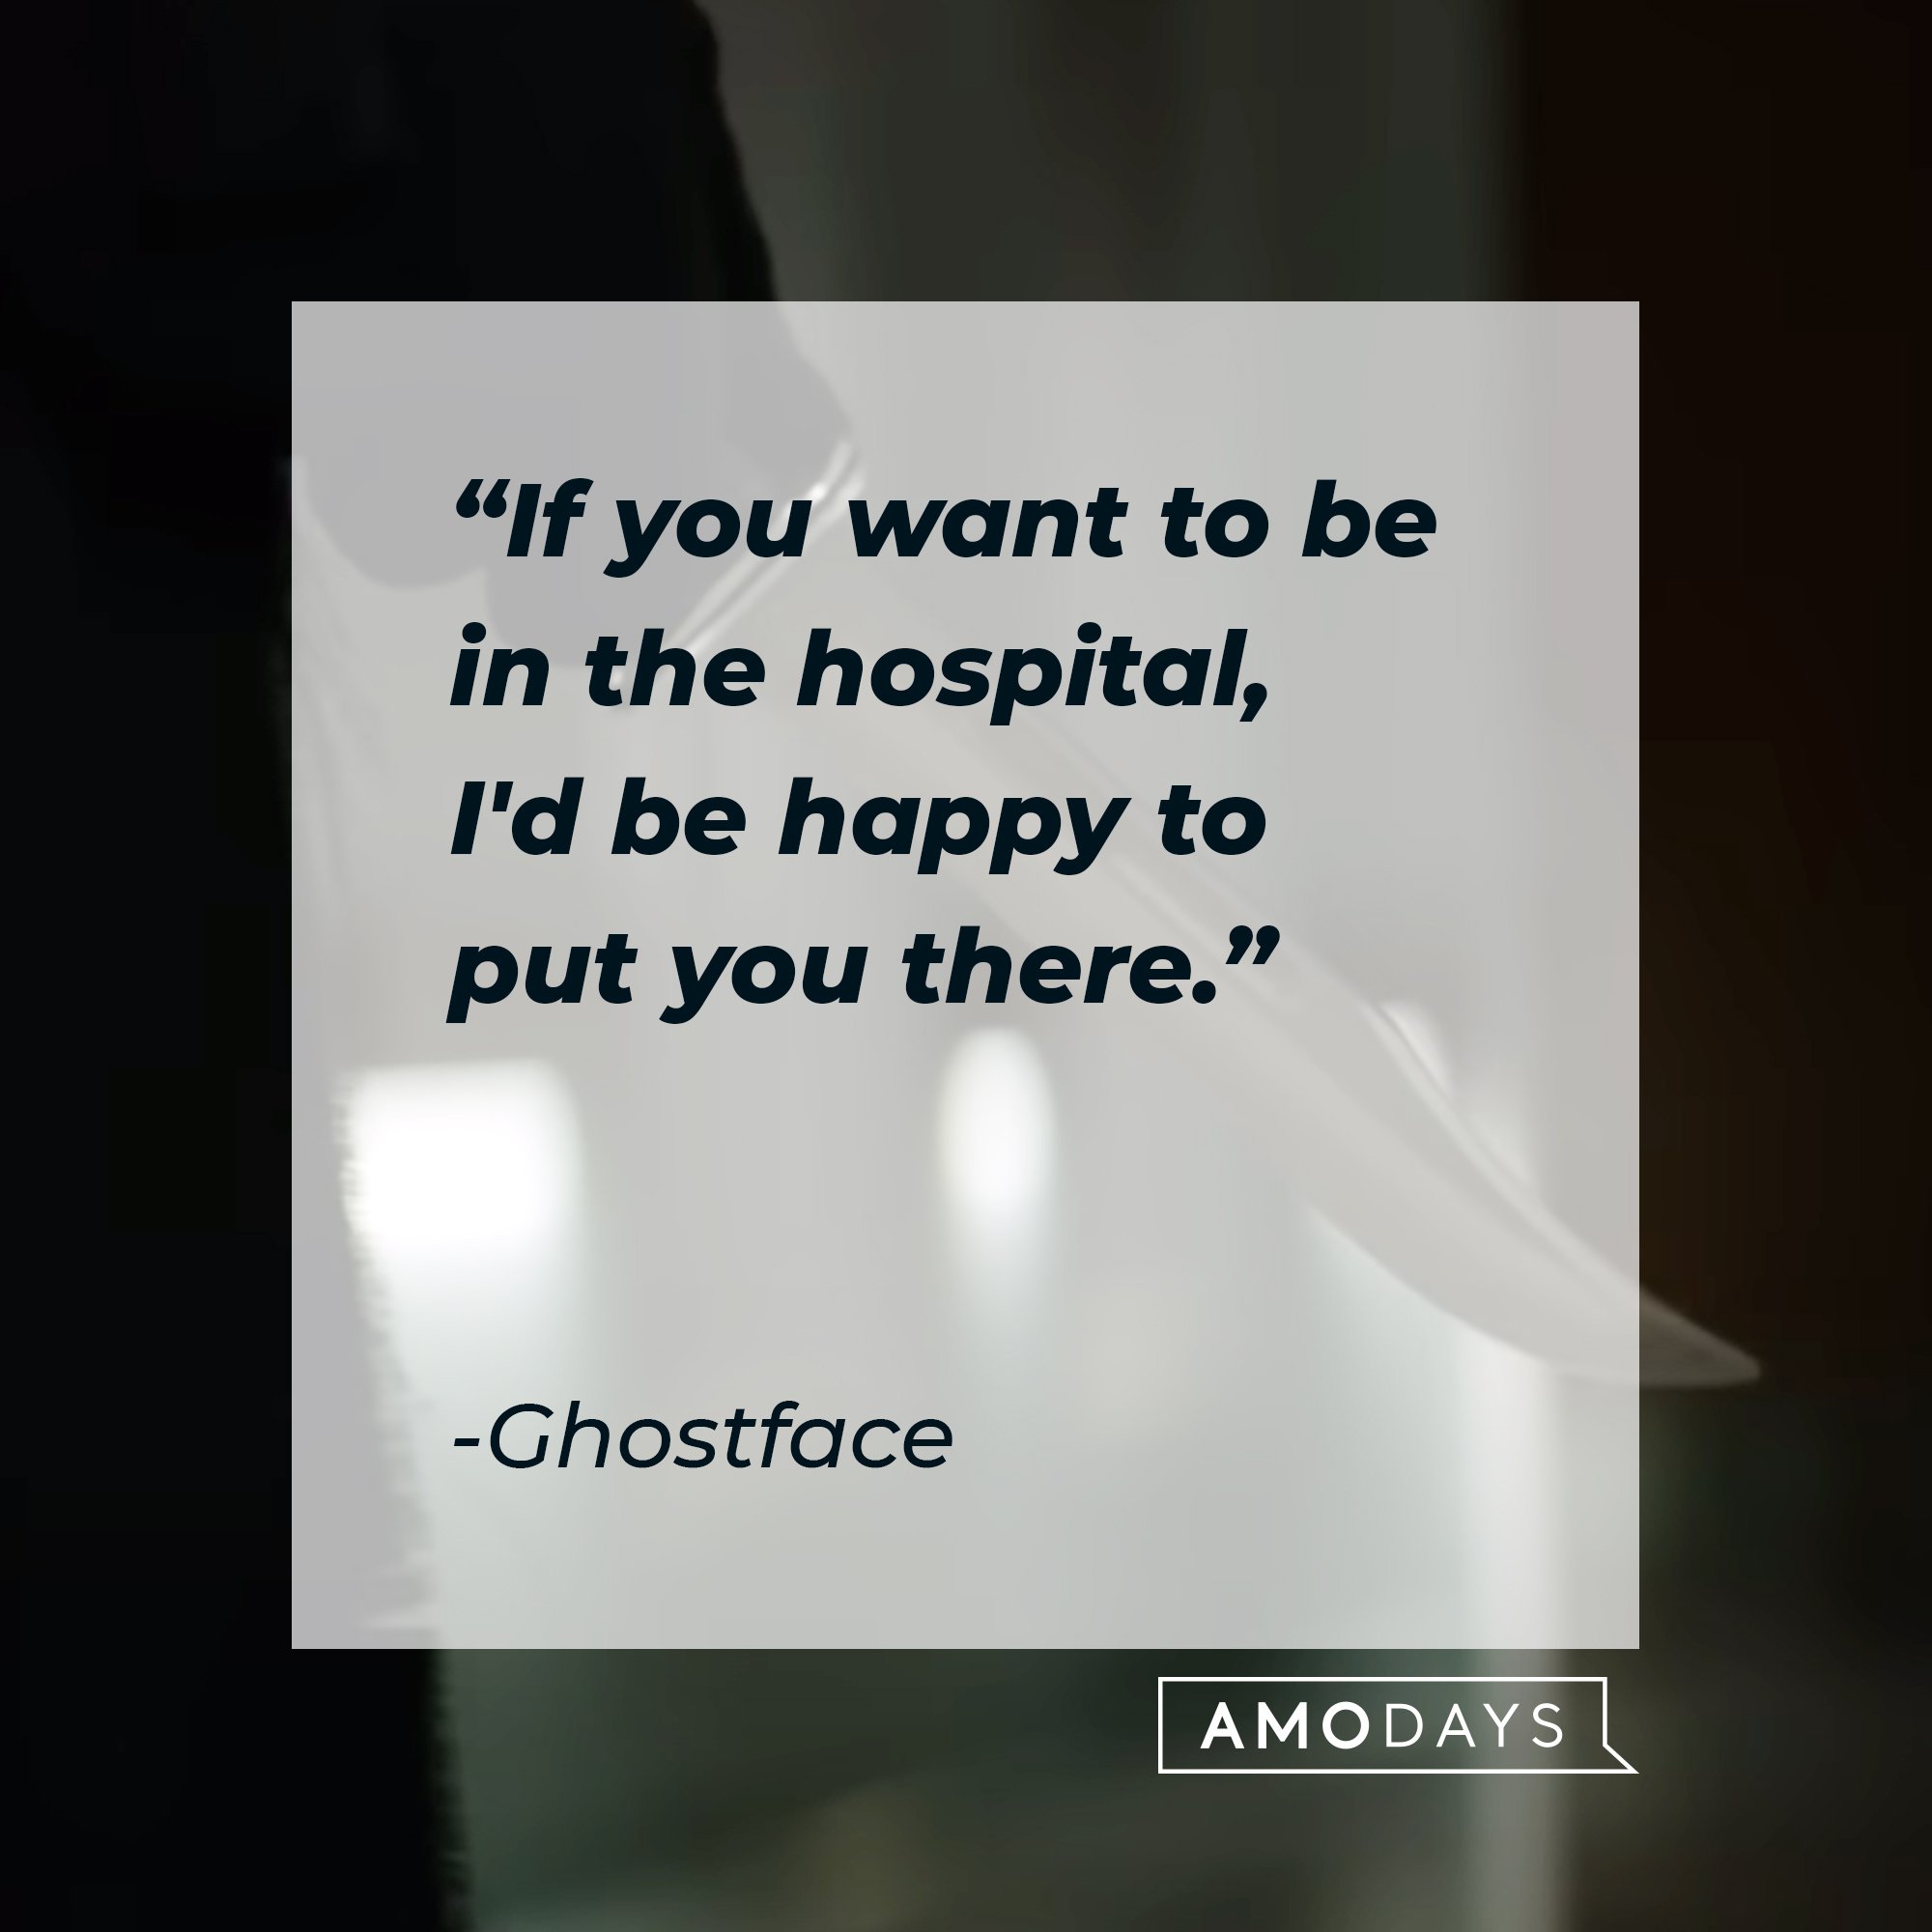 Ghostface’s quote: "If you want to be in the hospital, I'd be happy to put you there." | Image: AmoDays